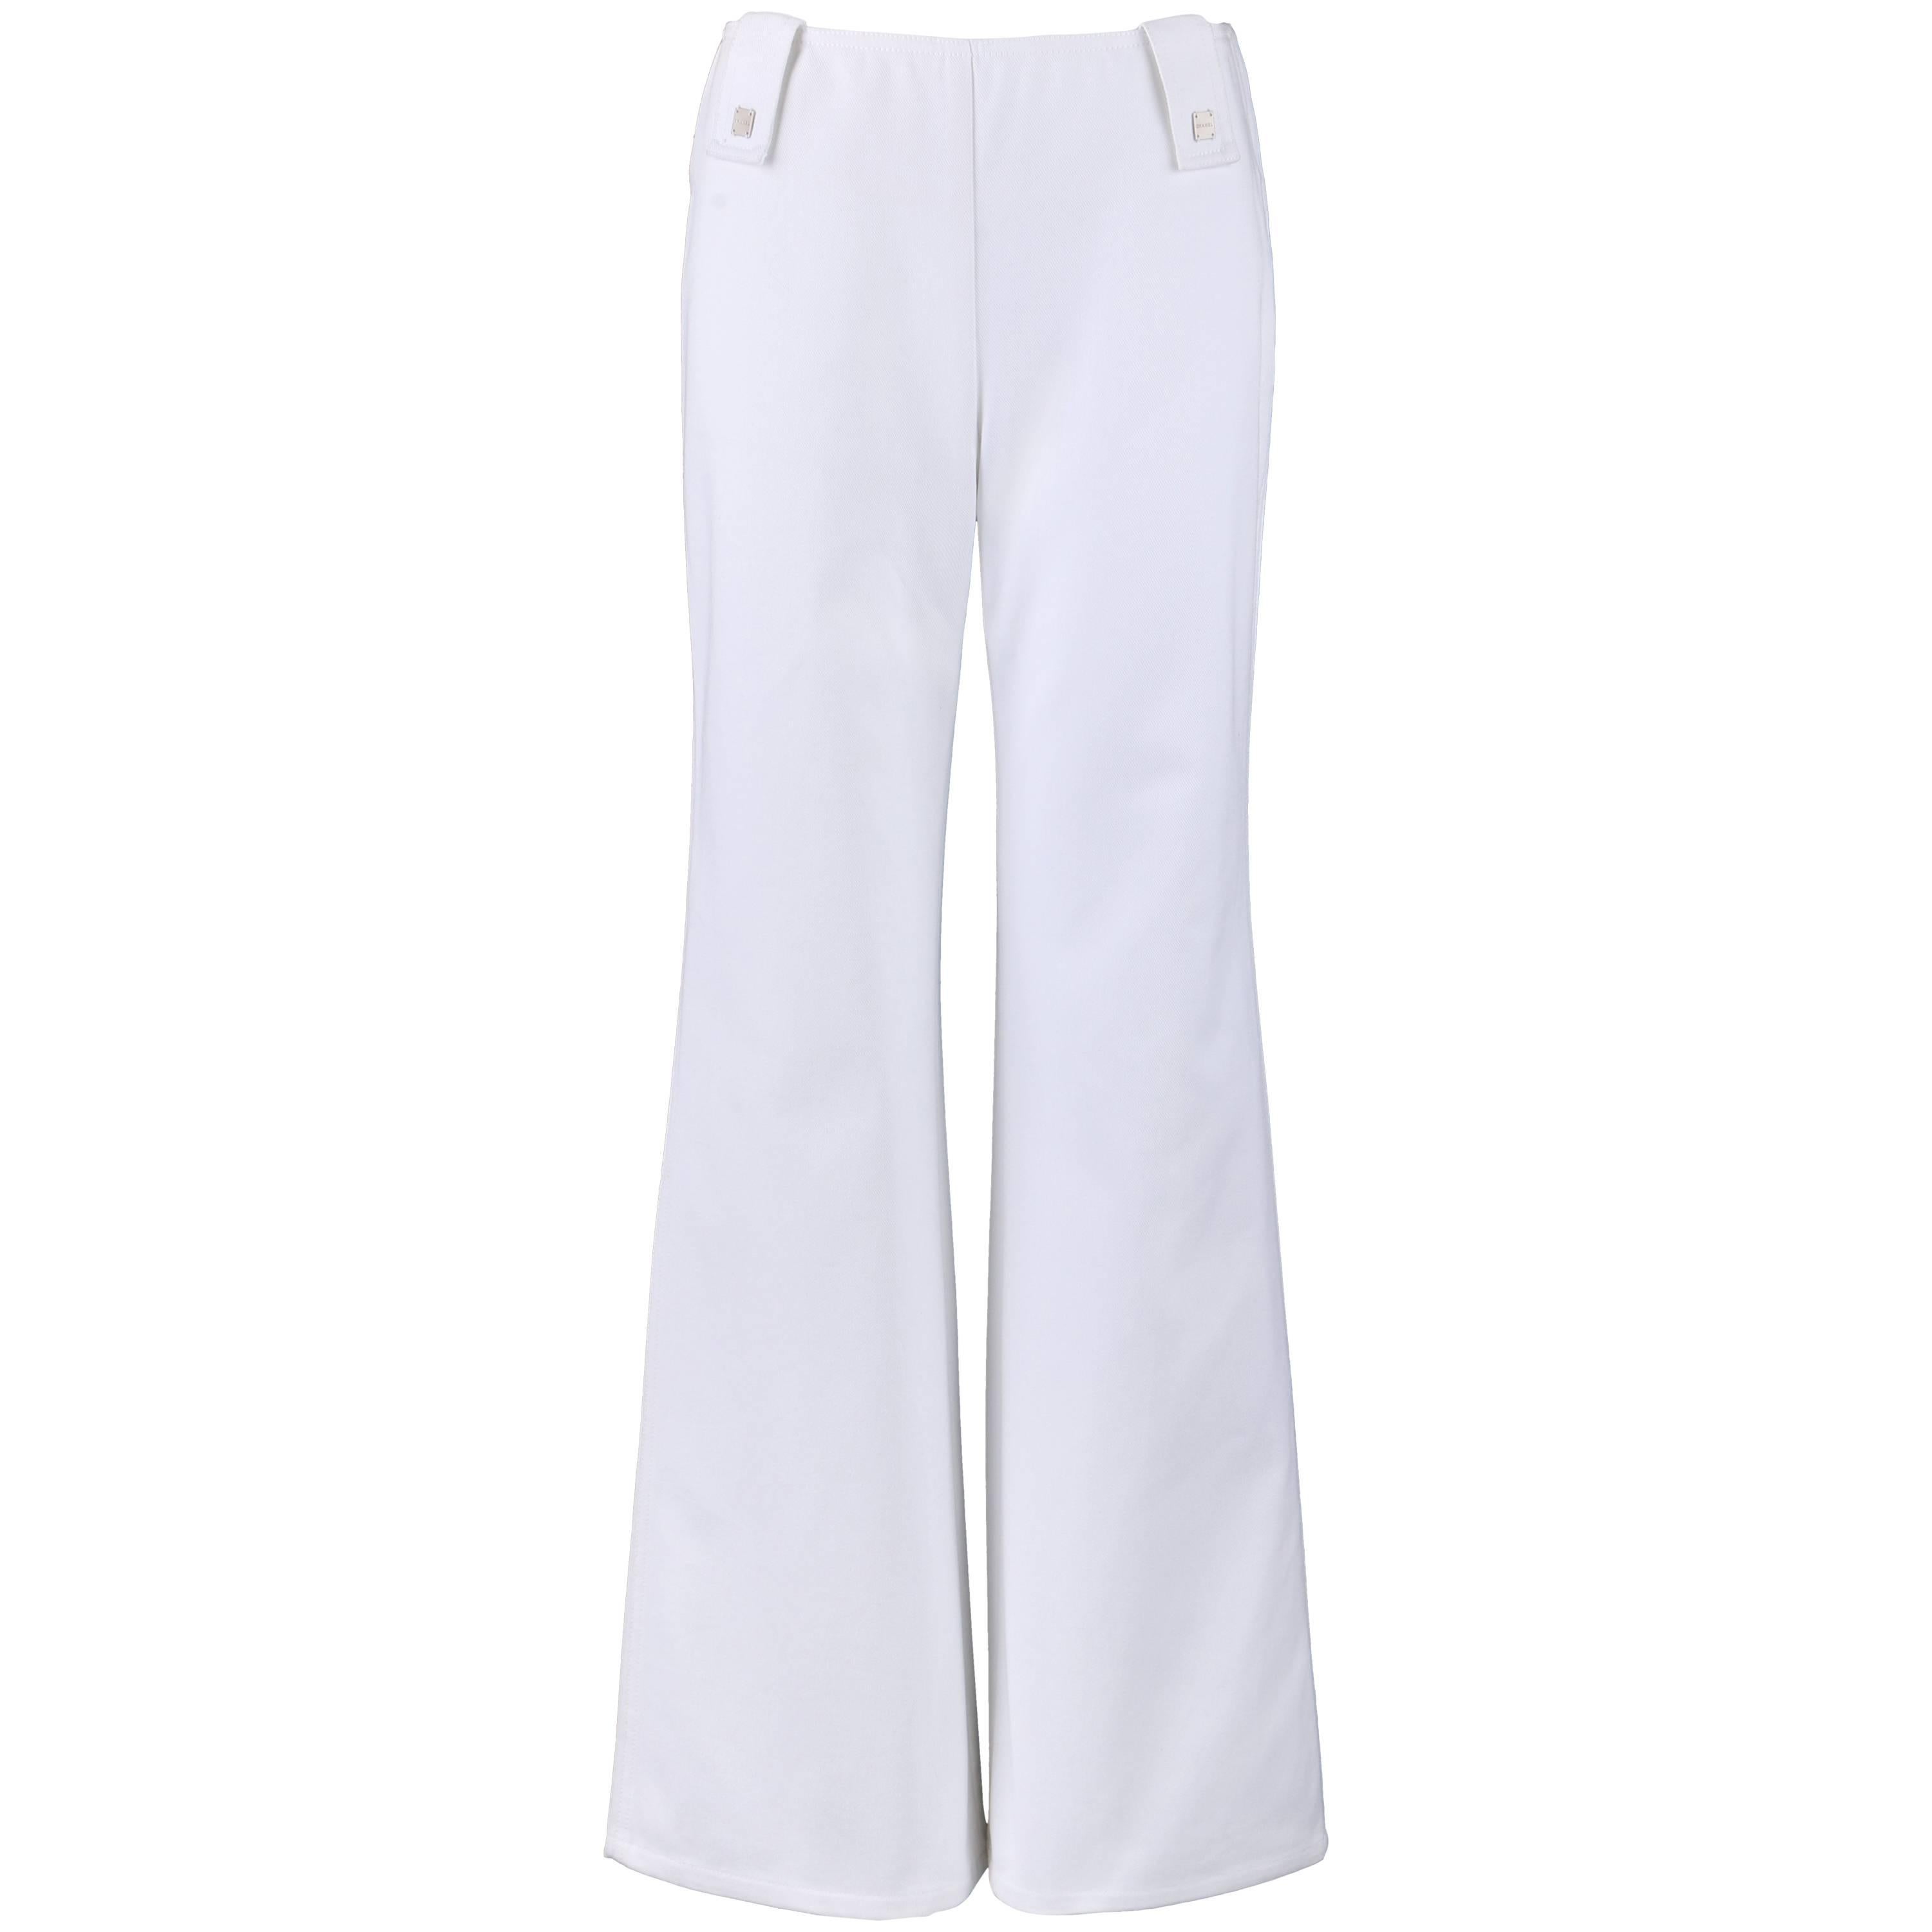 CHANEL S/S 2001 White Denim High Waisted Flare Jeans Pants